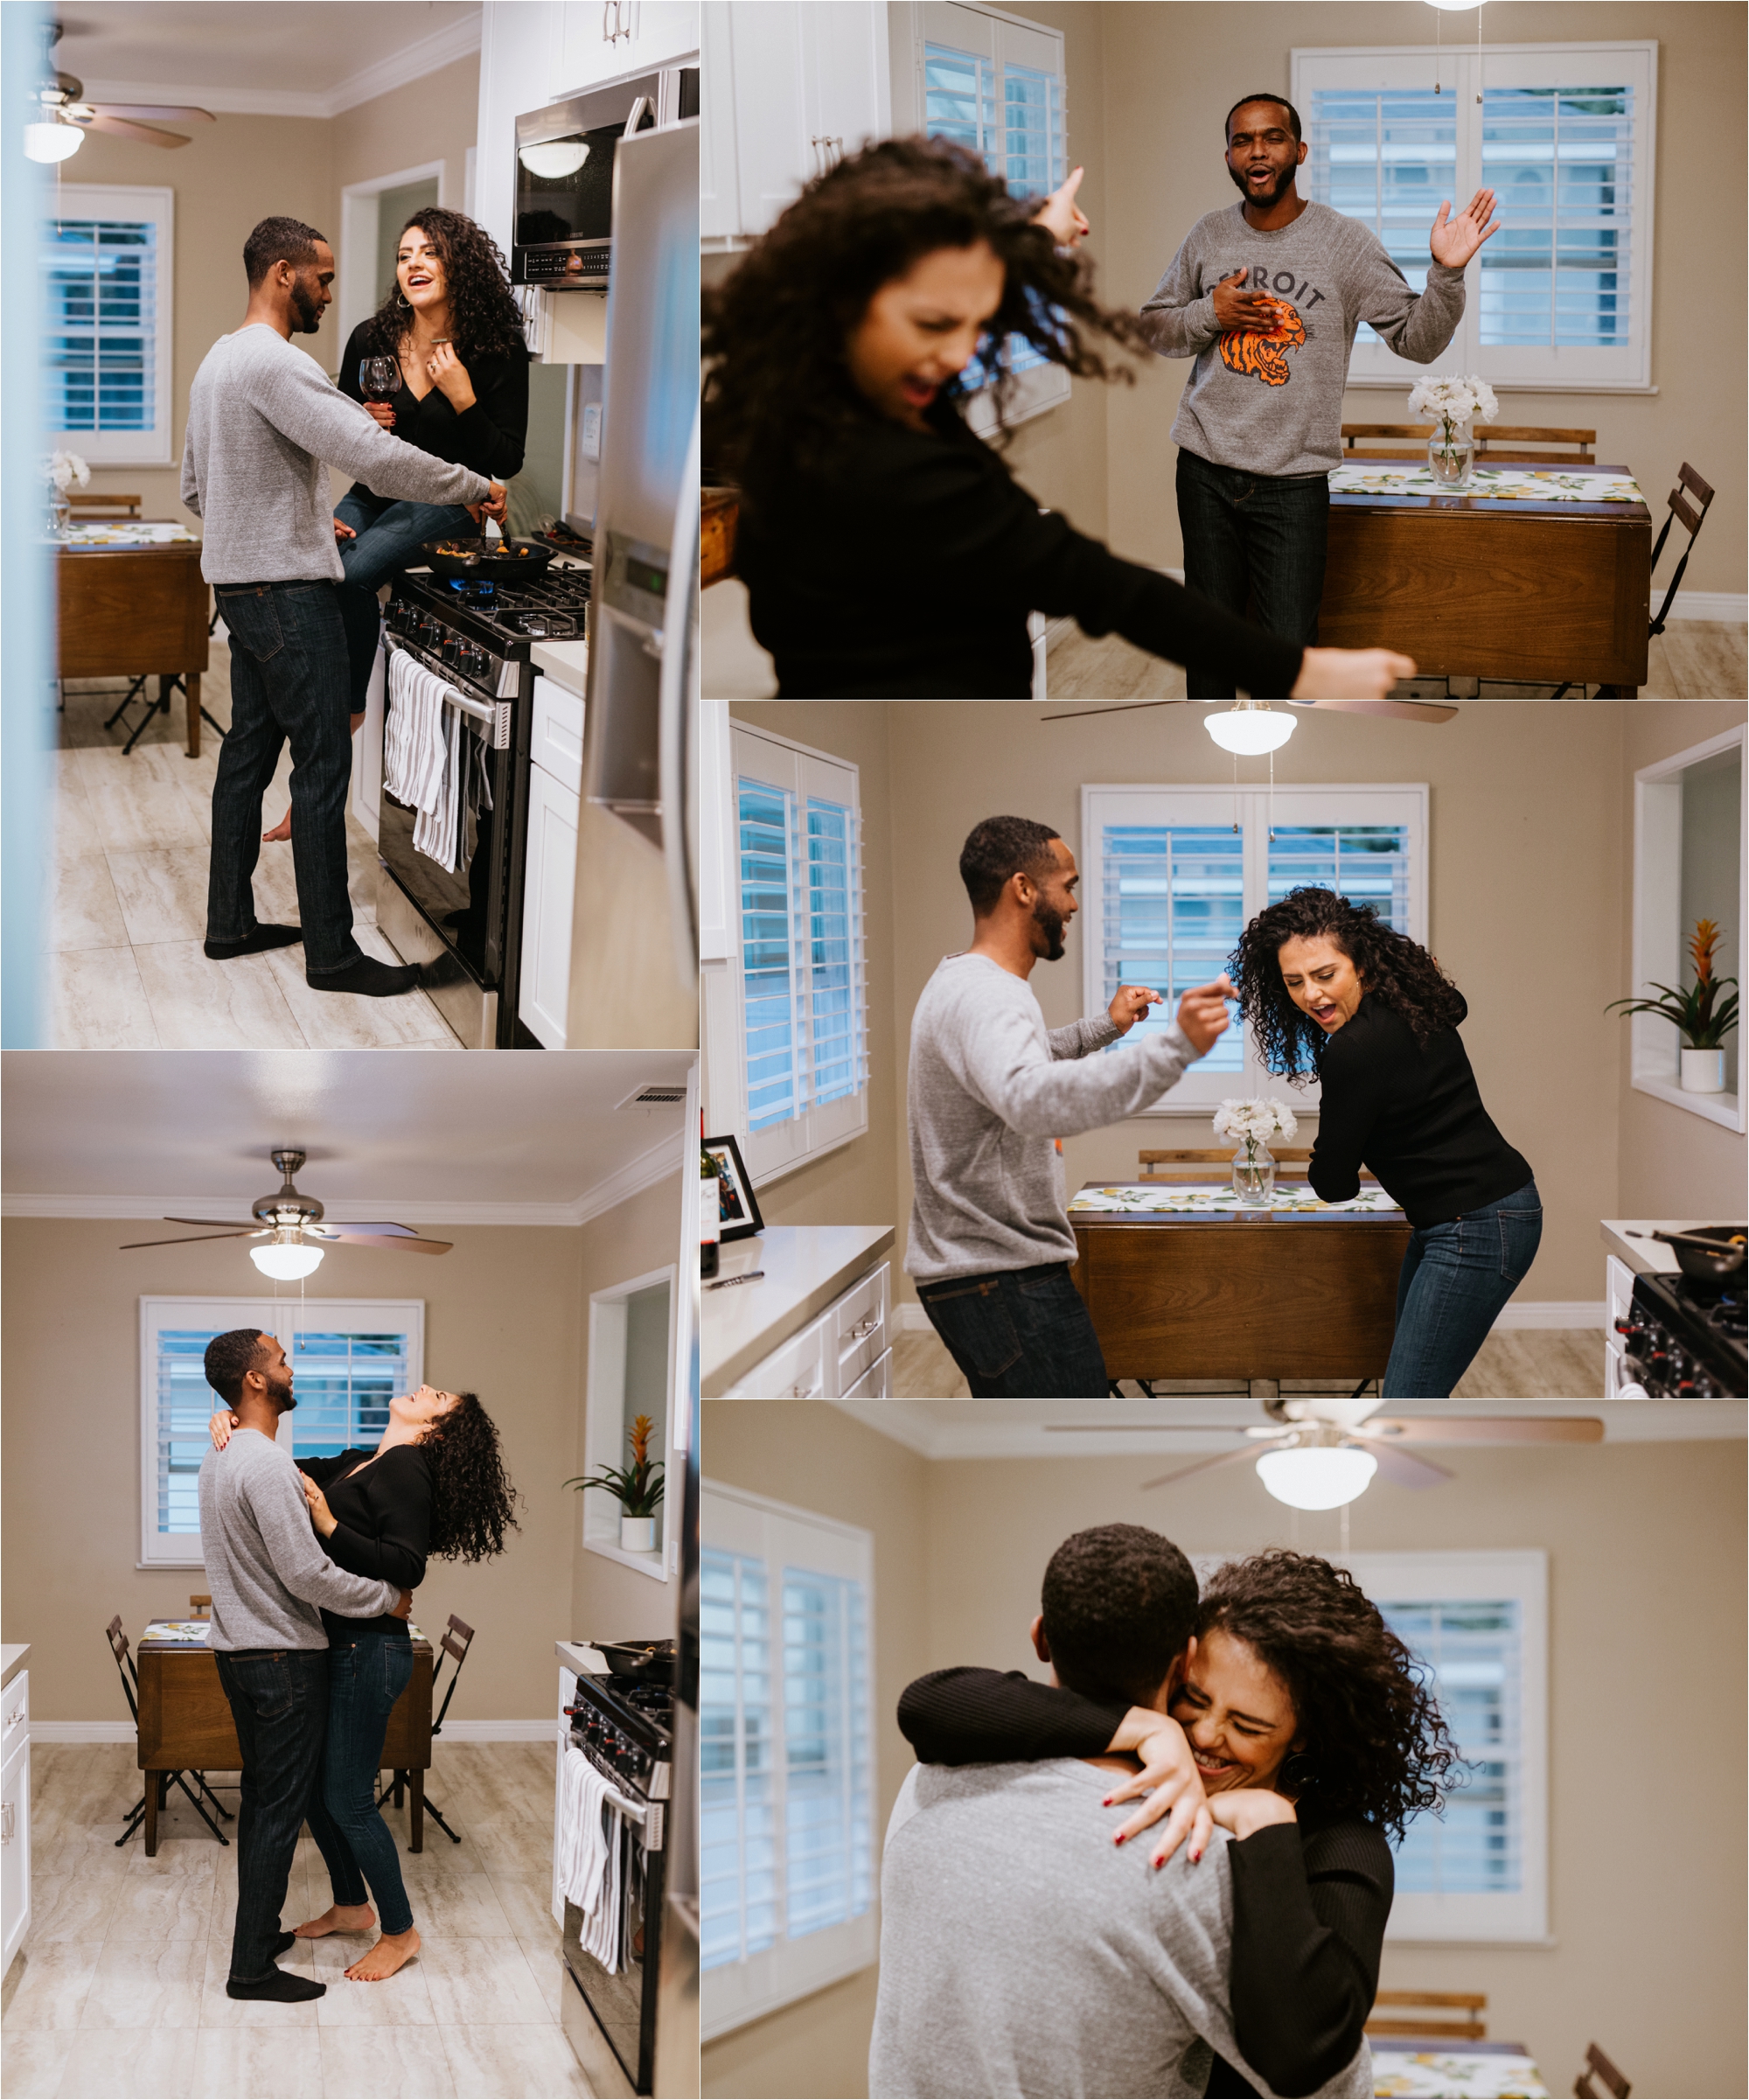 los angeles wedding photographer engagement in home session west covina love interracial